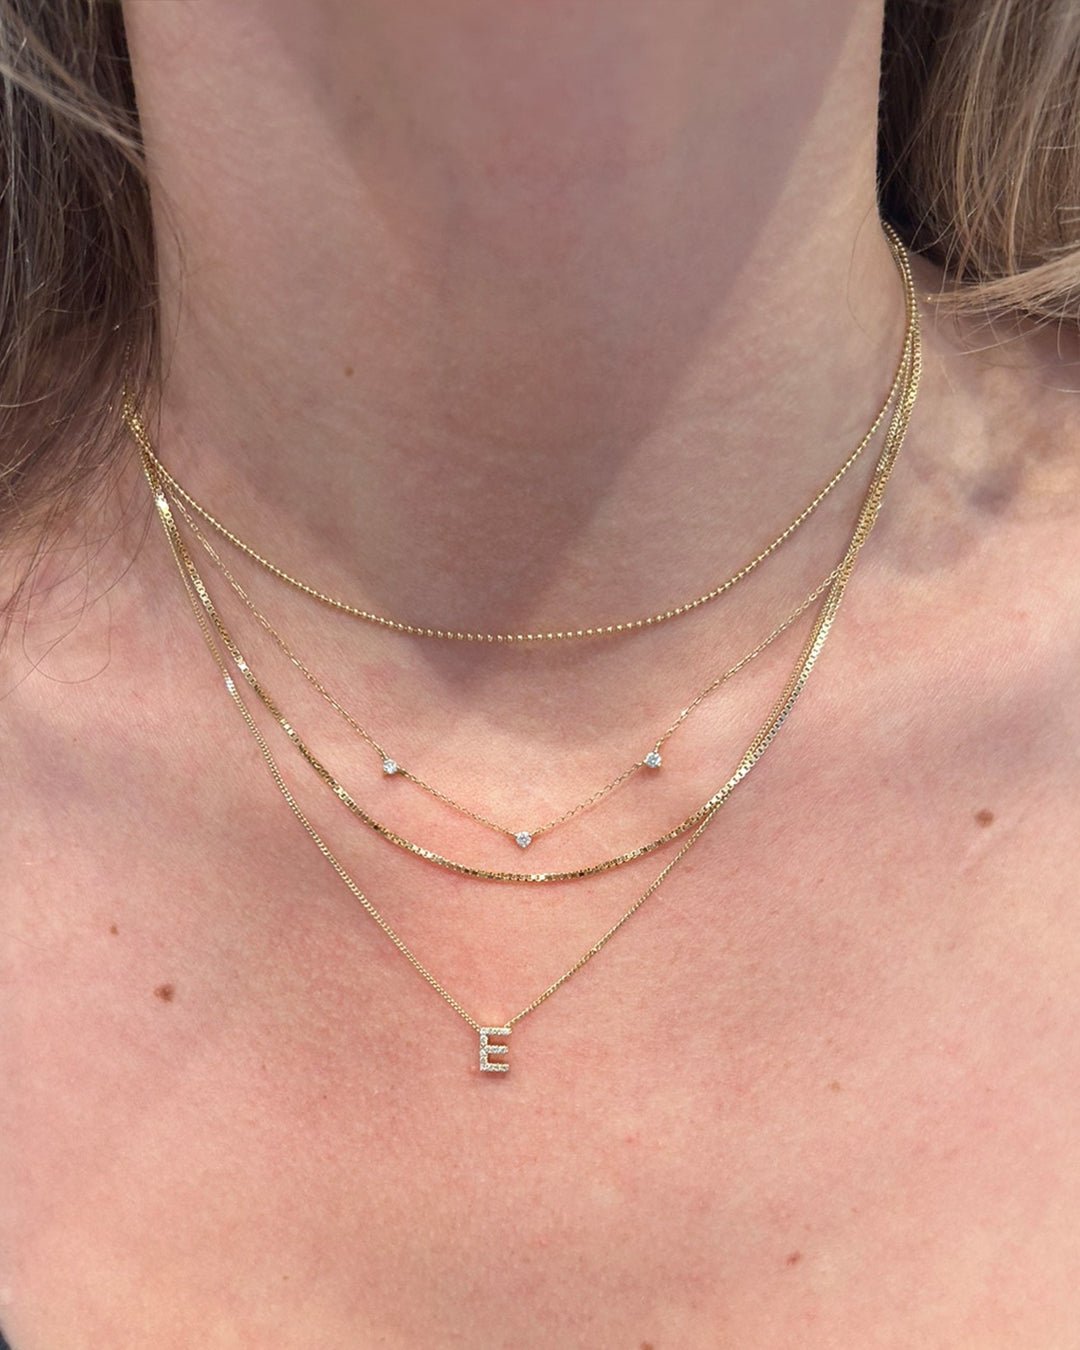 Woman wearing 14k and 18k solid gold necklaces. 